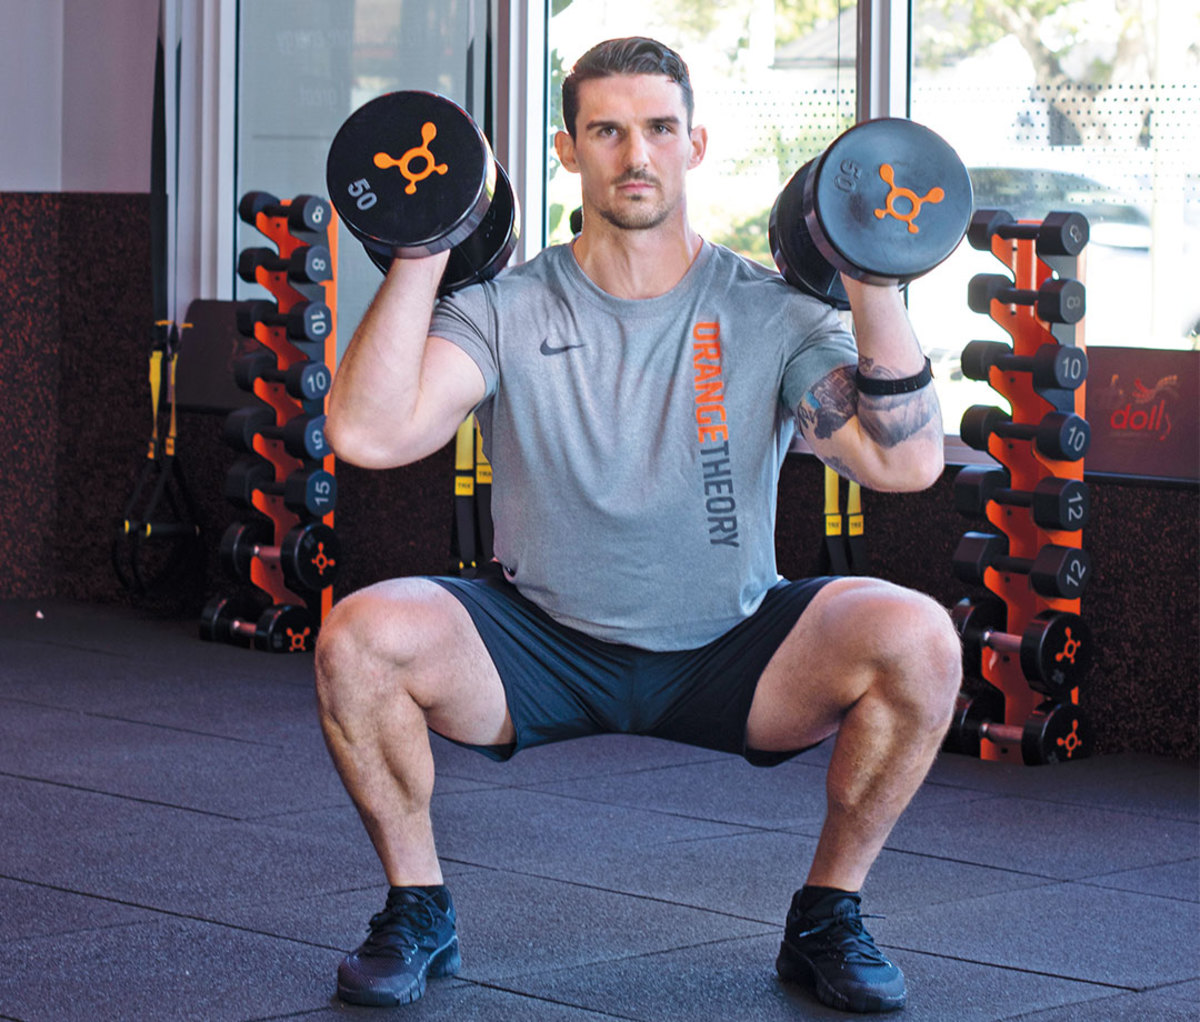 Dumbbell Squat to Alternate Single-Arm Press with Rotation